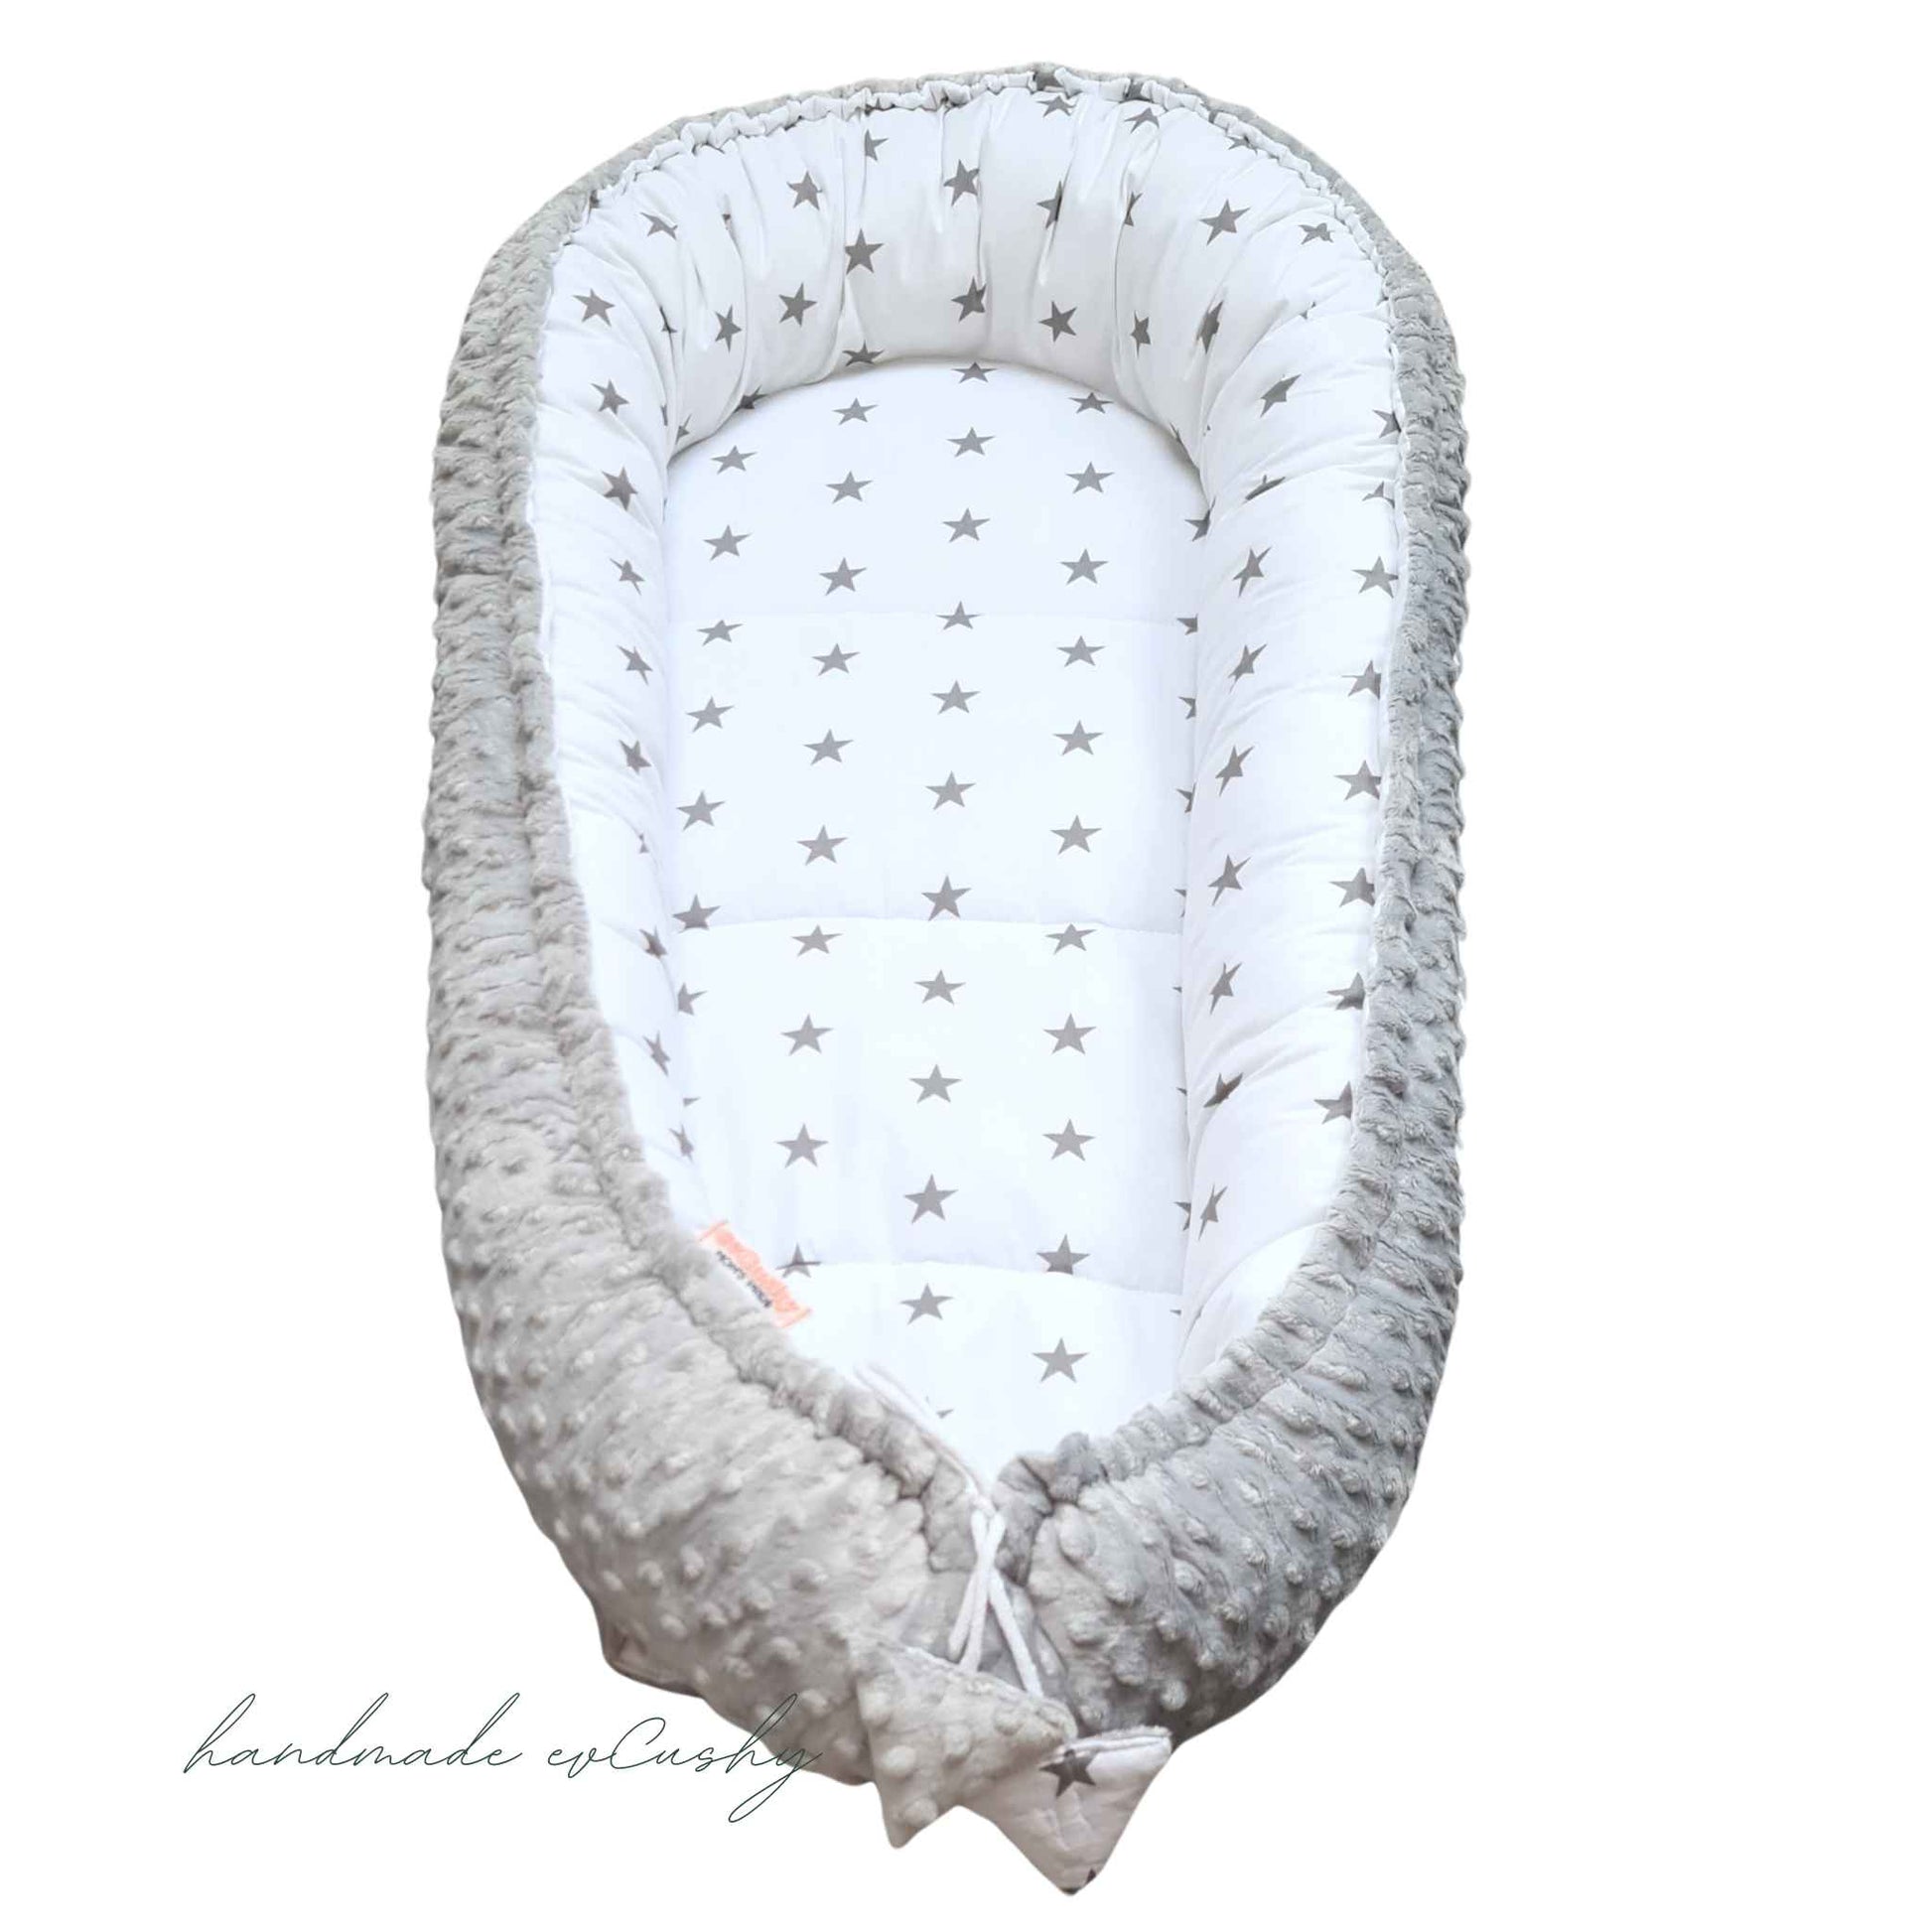 evcushy cosy baby nest sleeping pod for baby 0+ months grey & white cosy safe nest up to 9 months